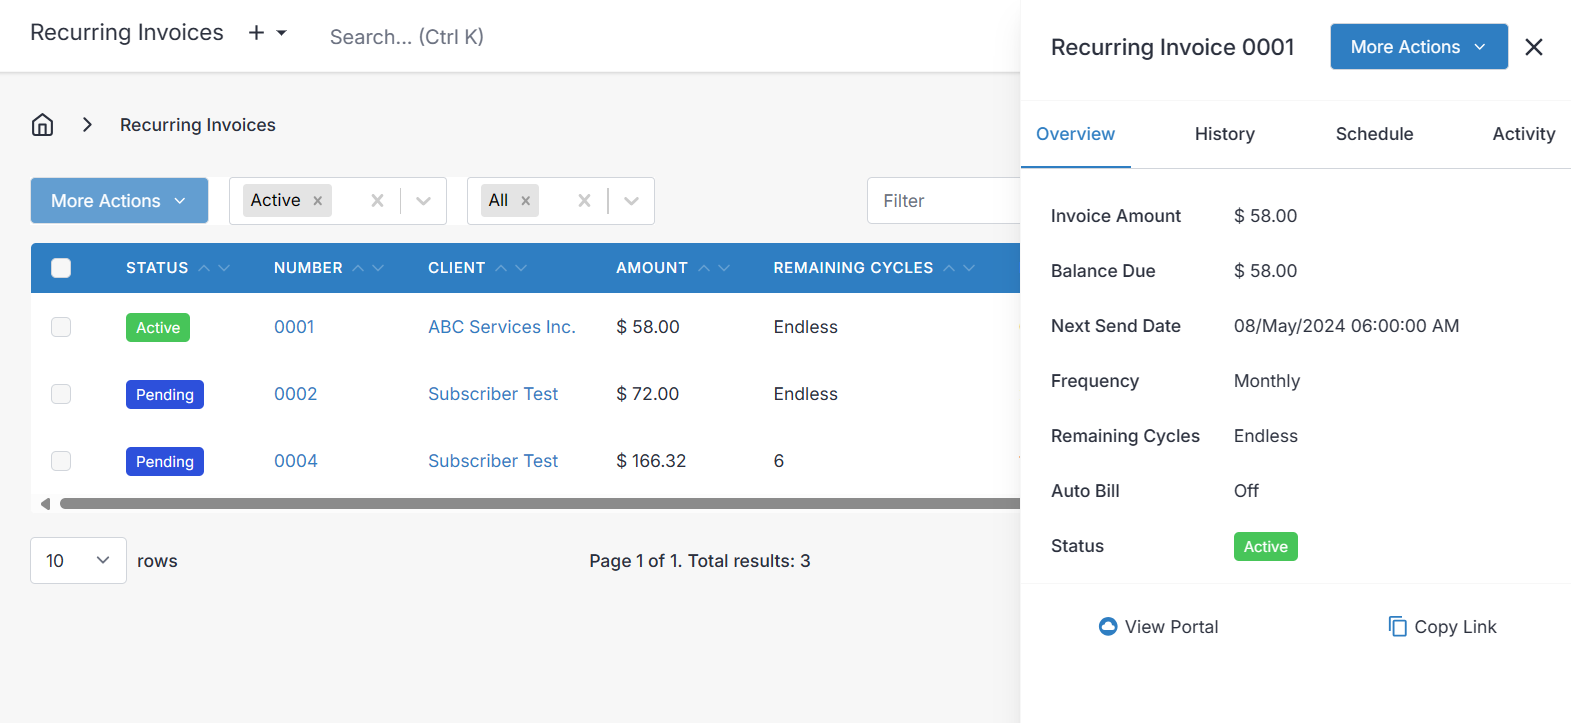 Recurring invoice overview pane